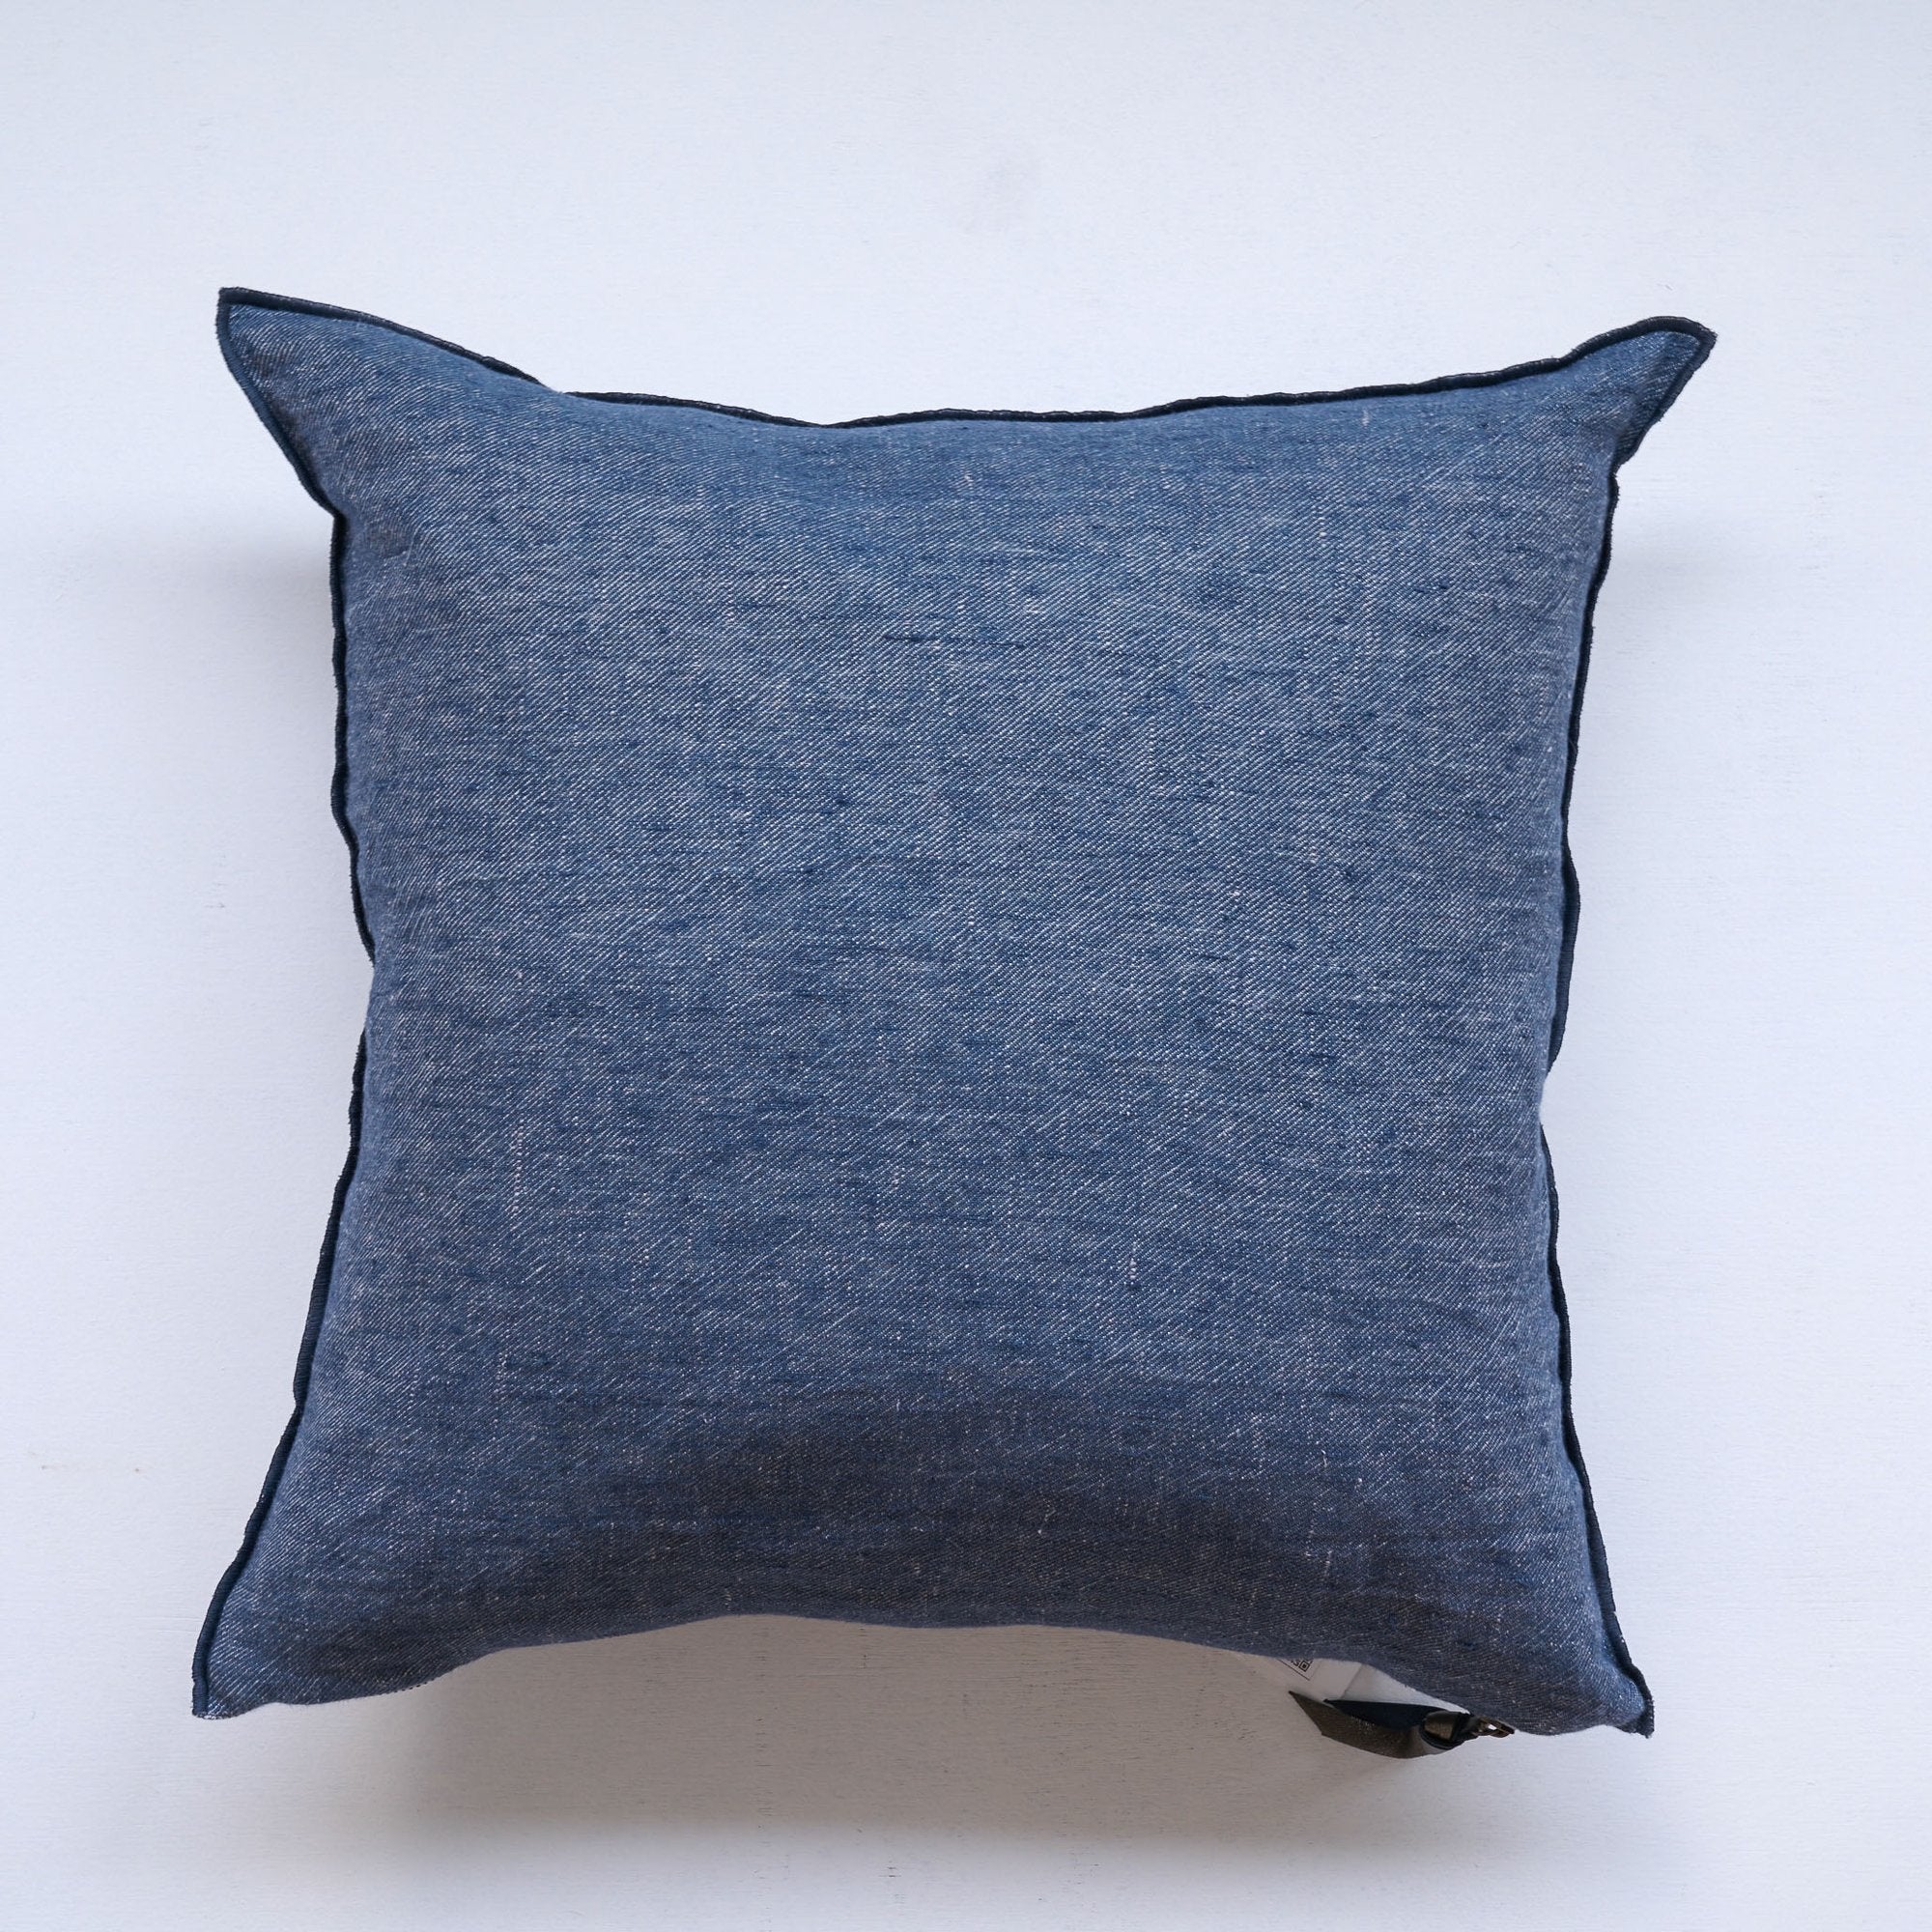 TWO TONED CUSHION